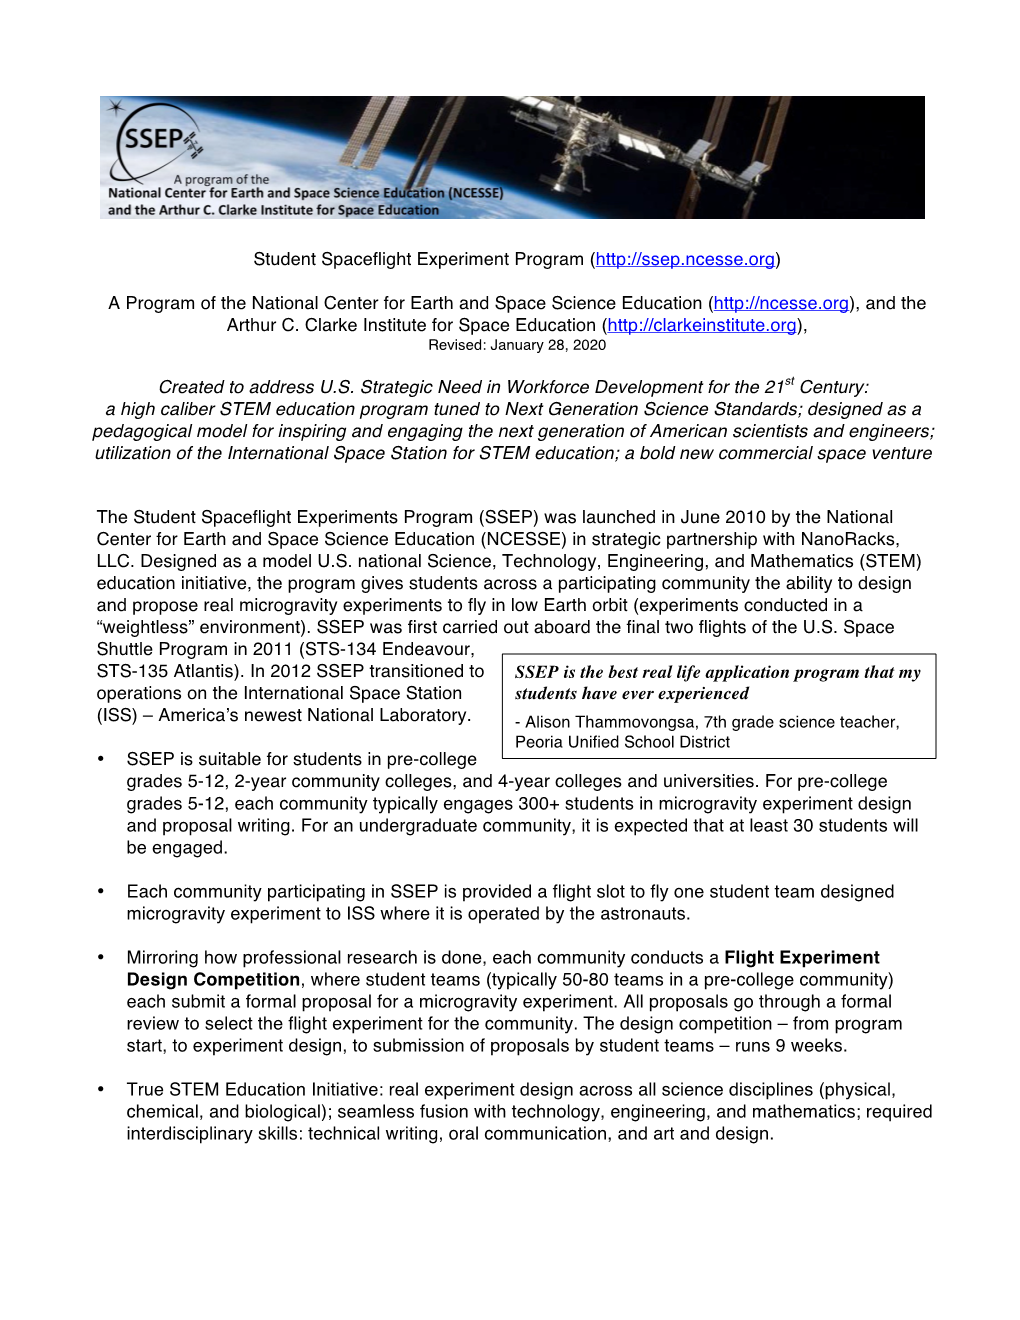 2-Page SSEP Overview with Strategic Objectives, Used for Congressional